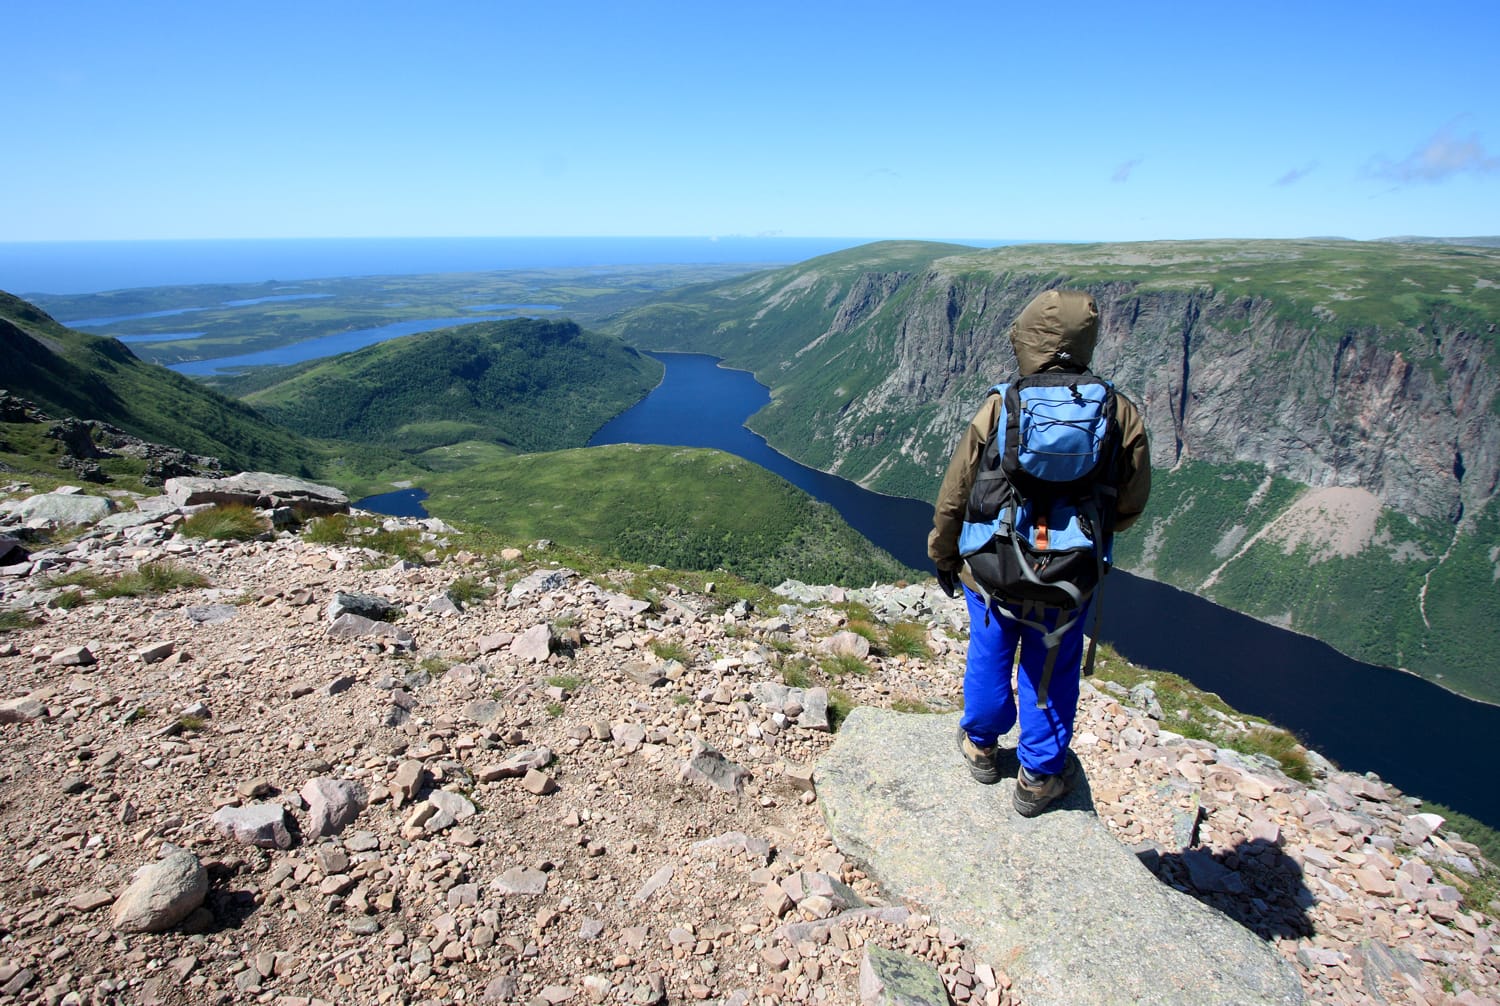 A female hiker standing on Gros Morne Mountain above Ten Mile Pond in Gros Morne National Park, Newfoundland, Canada.